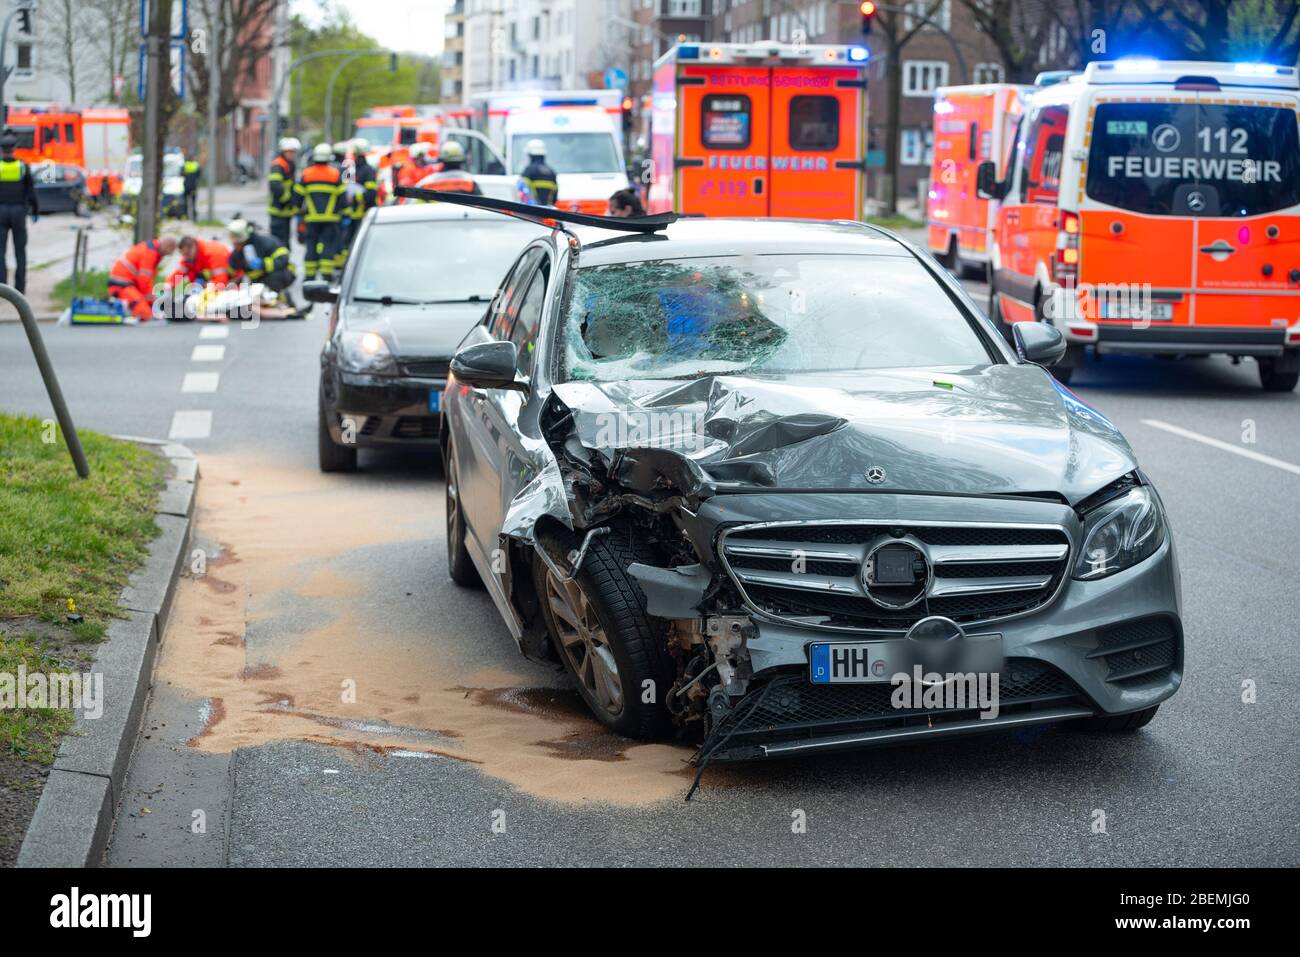 Hamburg, Germany. 14th Apr, 2020. The badly damaged Mercedes is standing on the road after the accident, while rescue workers are caring for the victims in the background. The vehicle had veered off the road in the Altona district, skidded into a traffic light and hit two people. The man and woman suffered life-threatening injuries. The driver was 'apparently' intoxicated, according to a spokeswoman for the Hamburg Police Situation Center. Credit: Jonas Walzberg/dpa - ATTENTION: The license plate was pixelated for legal reasons/dpa/Alamy Live News Stock Photo